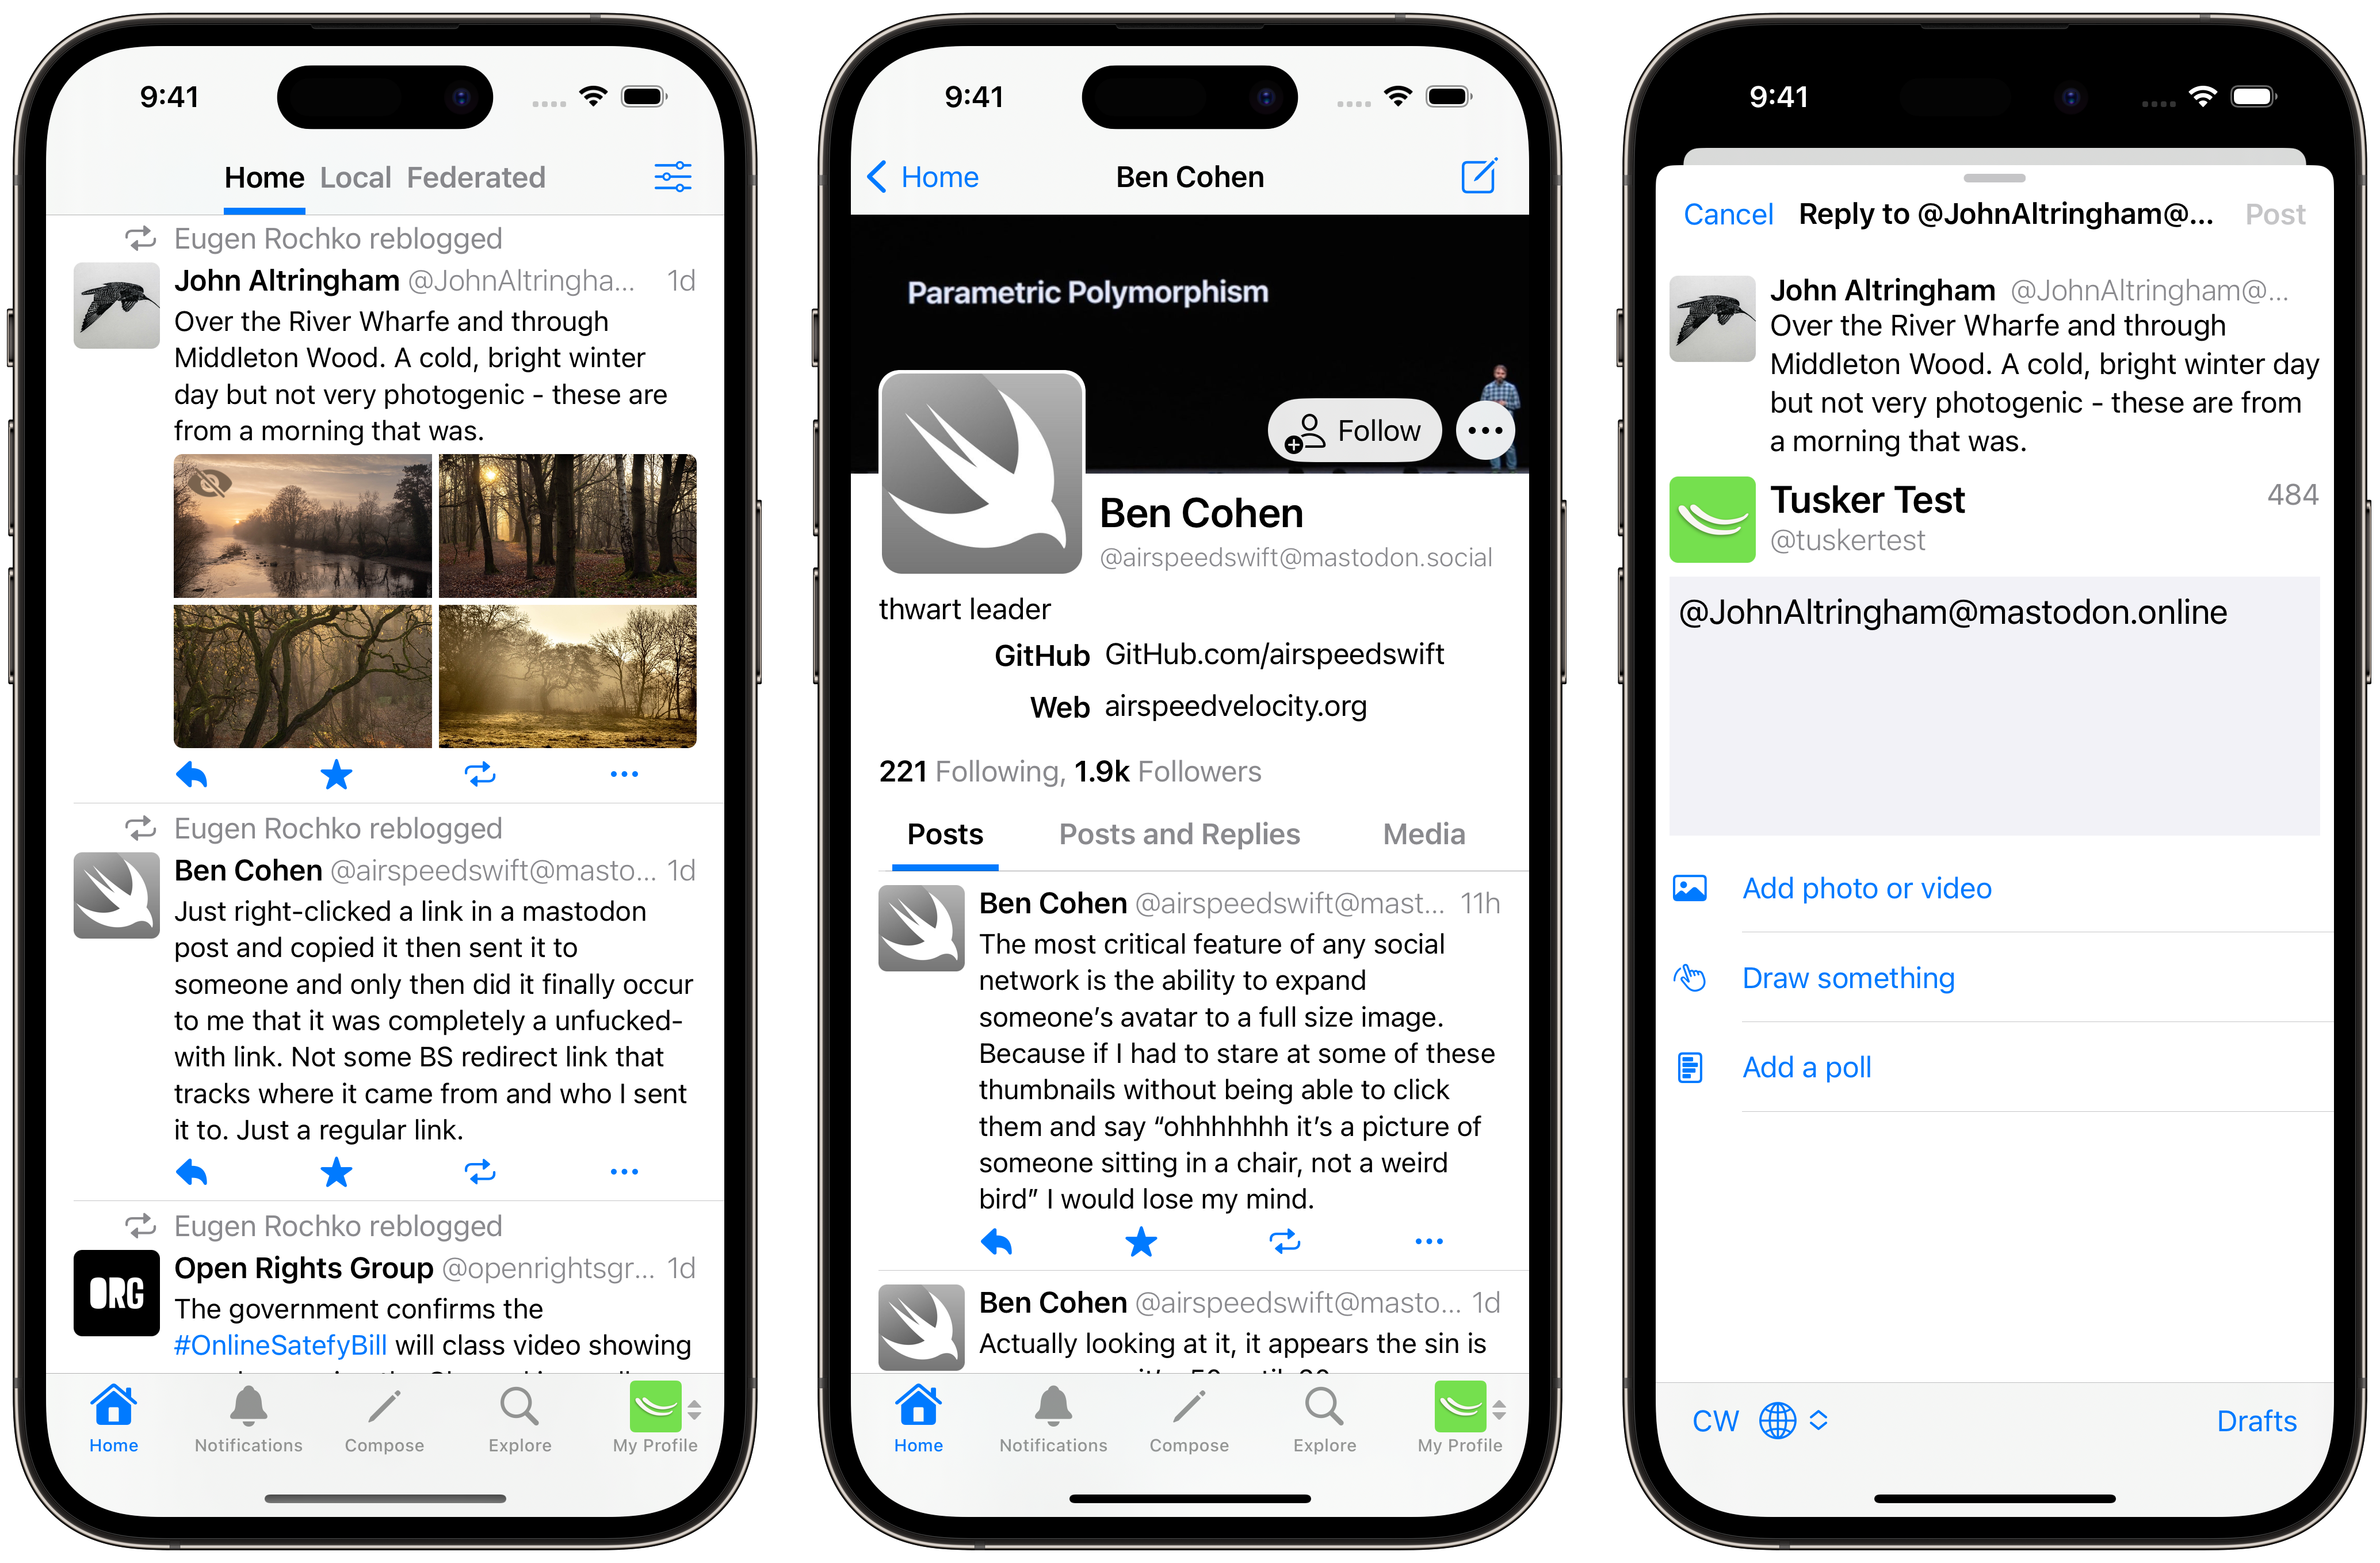 Timeline, profile, and compose screens